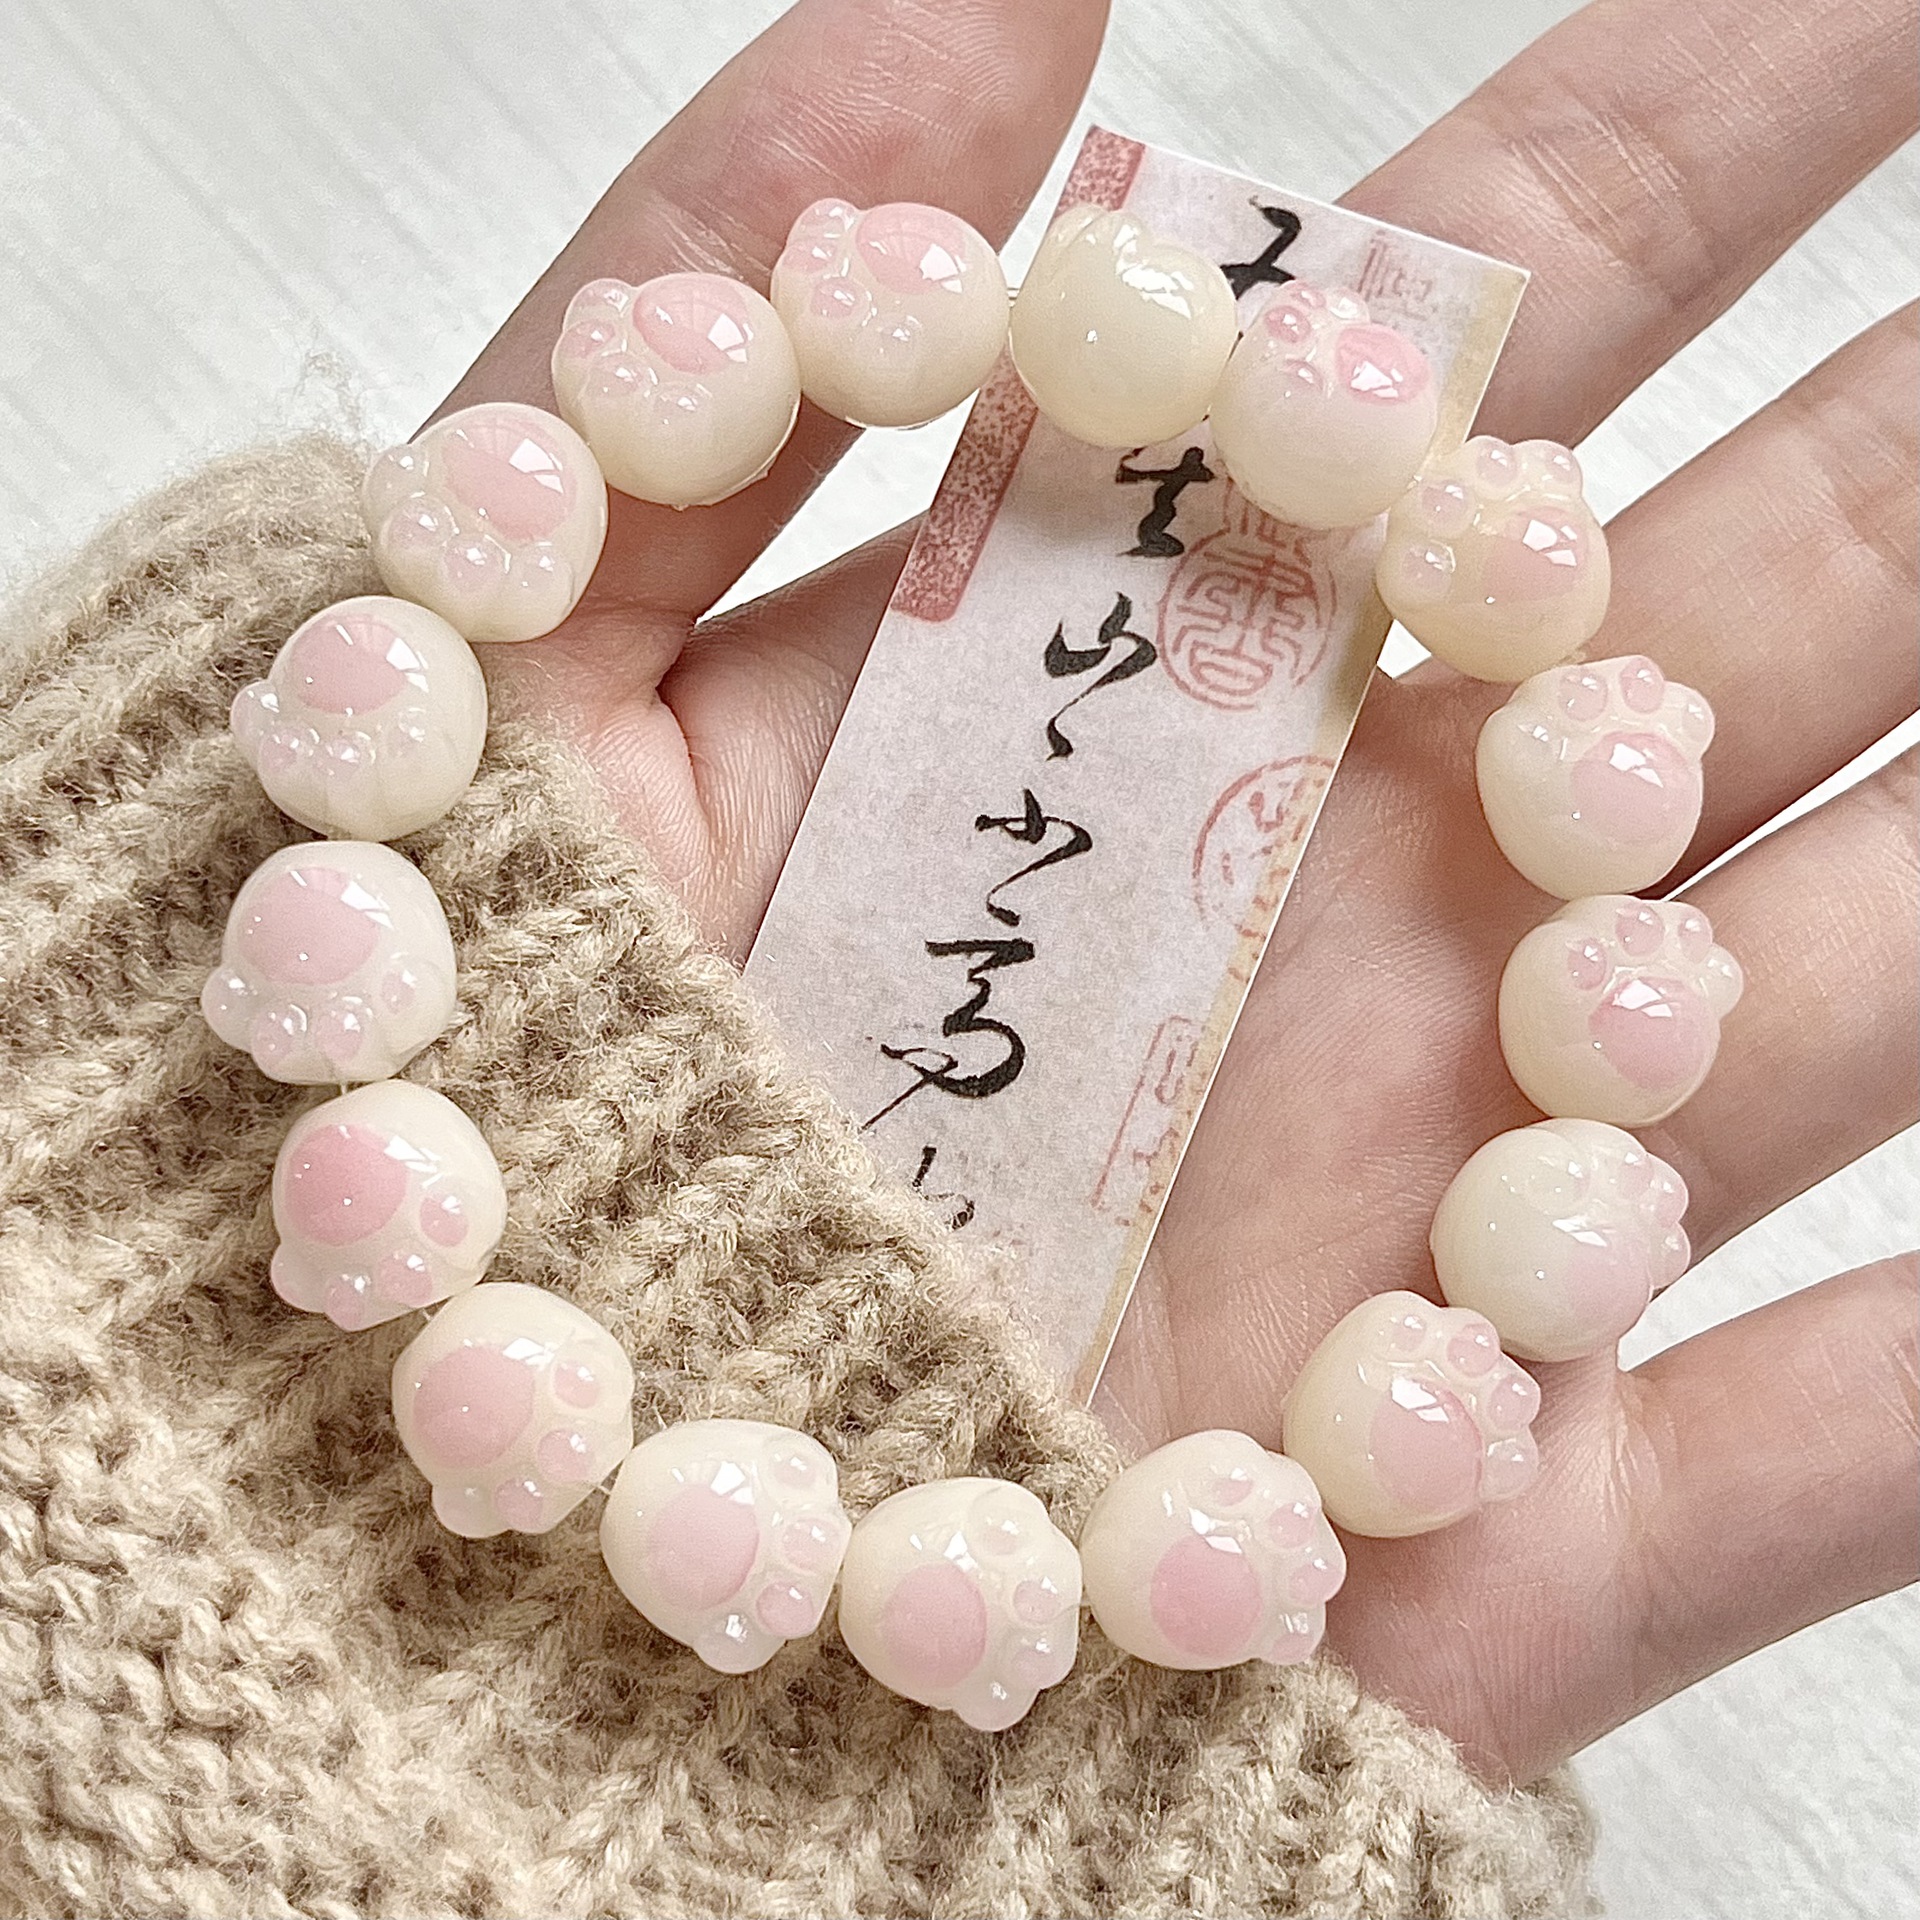 Ziduobao New Carving Cat's Paw Bodhi Bracelet Male and Female Students Bodhi Seed Pliable Temperament Crafts Hand Toy Bracelet Batch